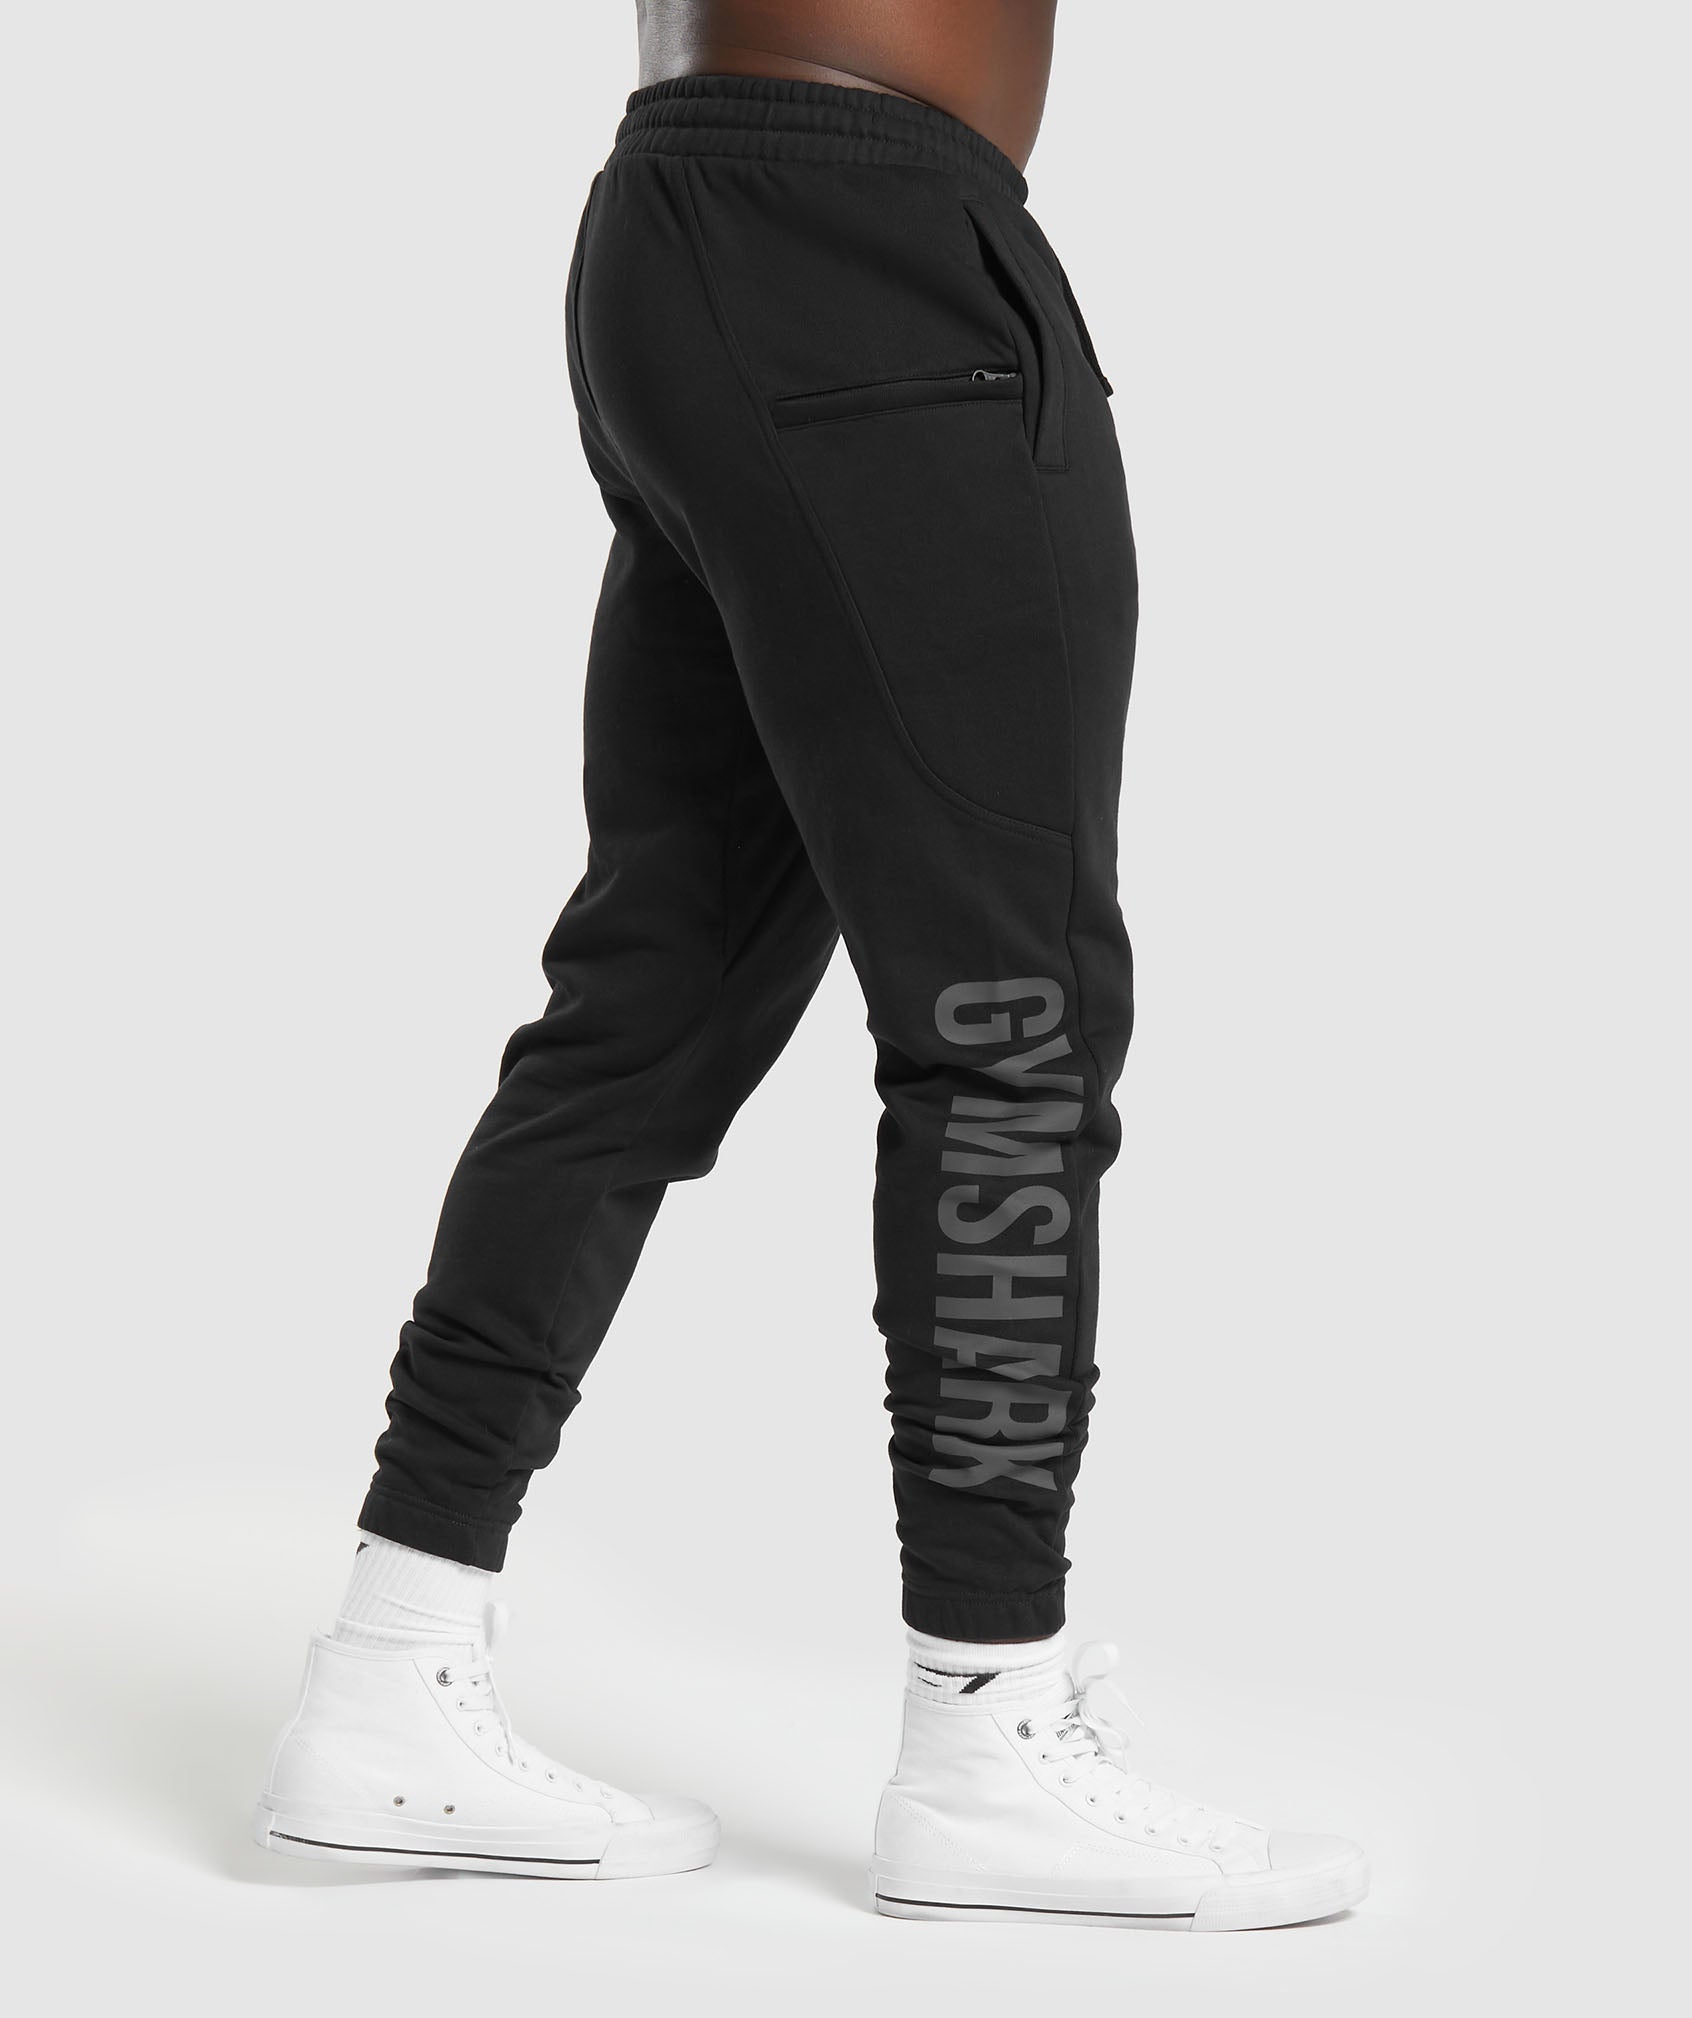 Male Polyester Mens Track Pants 4 Way Lycra Black at Rs 250/piece in Gurgaon